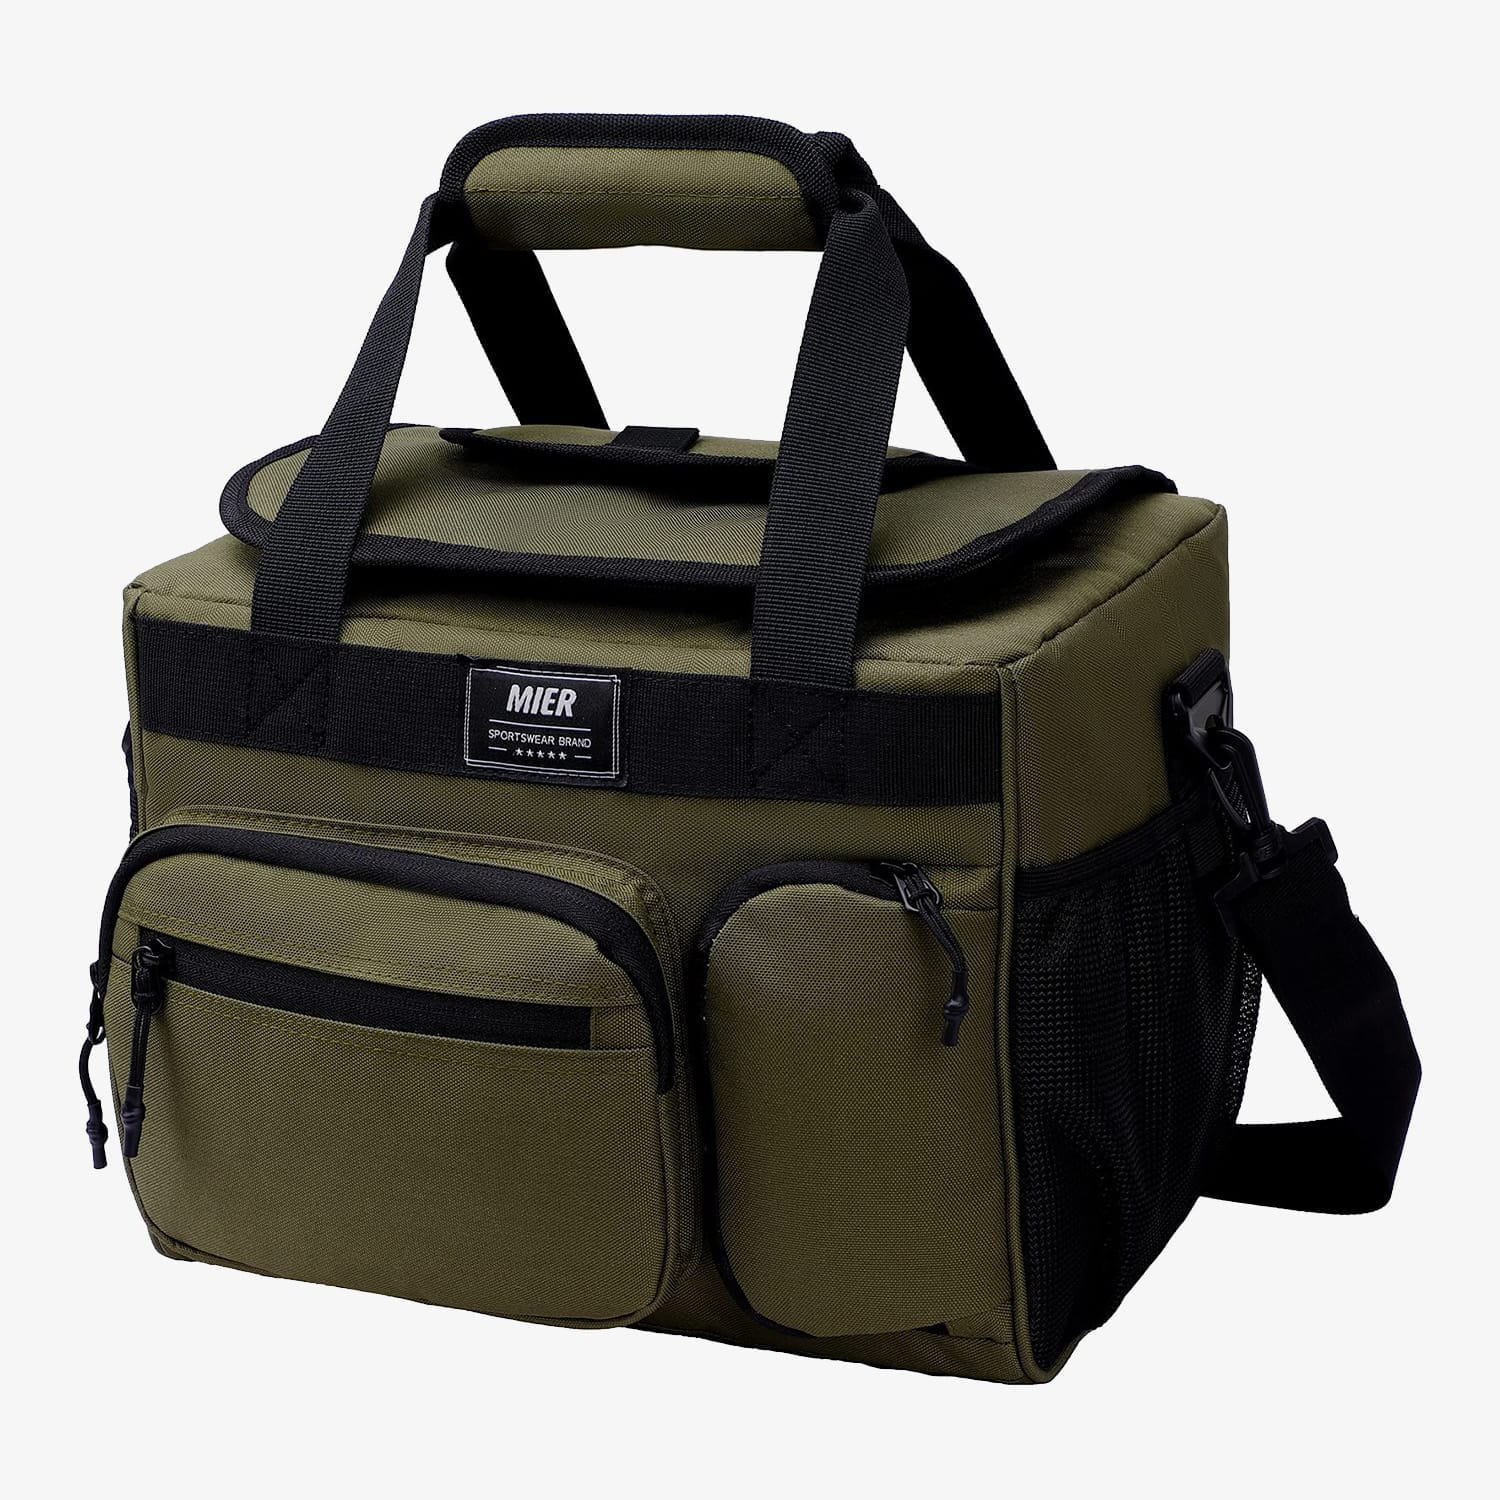 Leakproof Insulated Cooler Lunch Bag for Men Women Adult Lunch Bag Army Green MIER